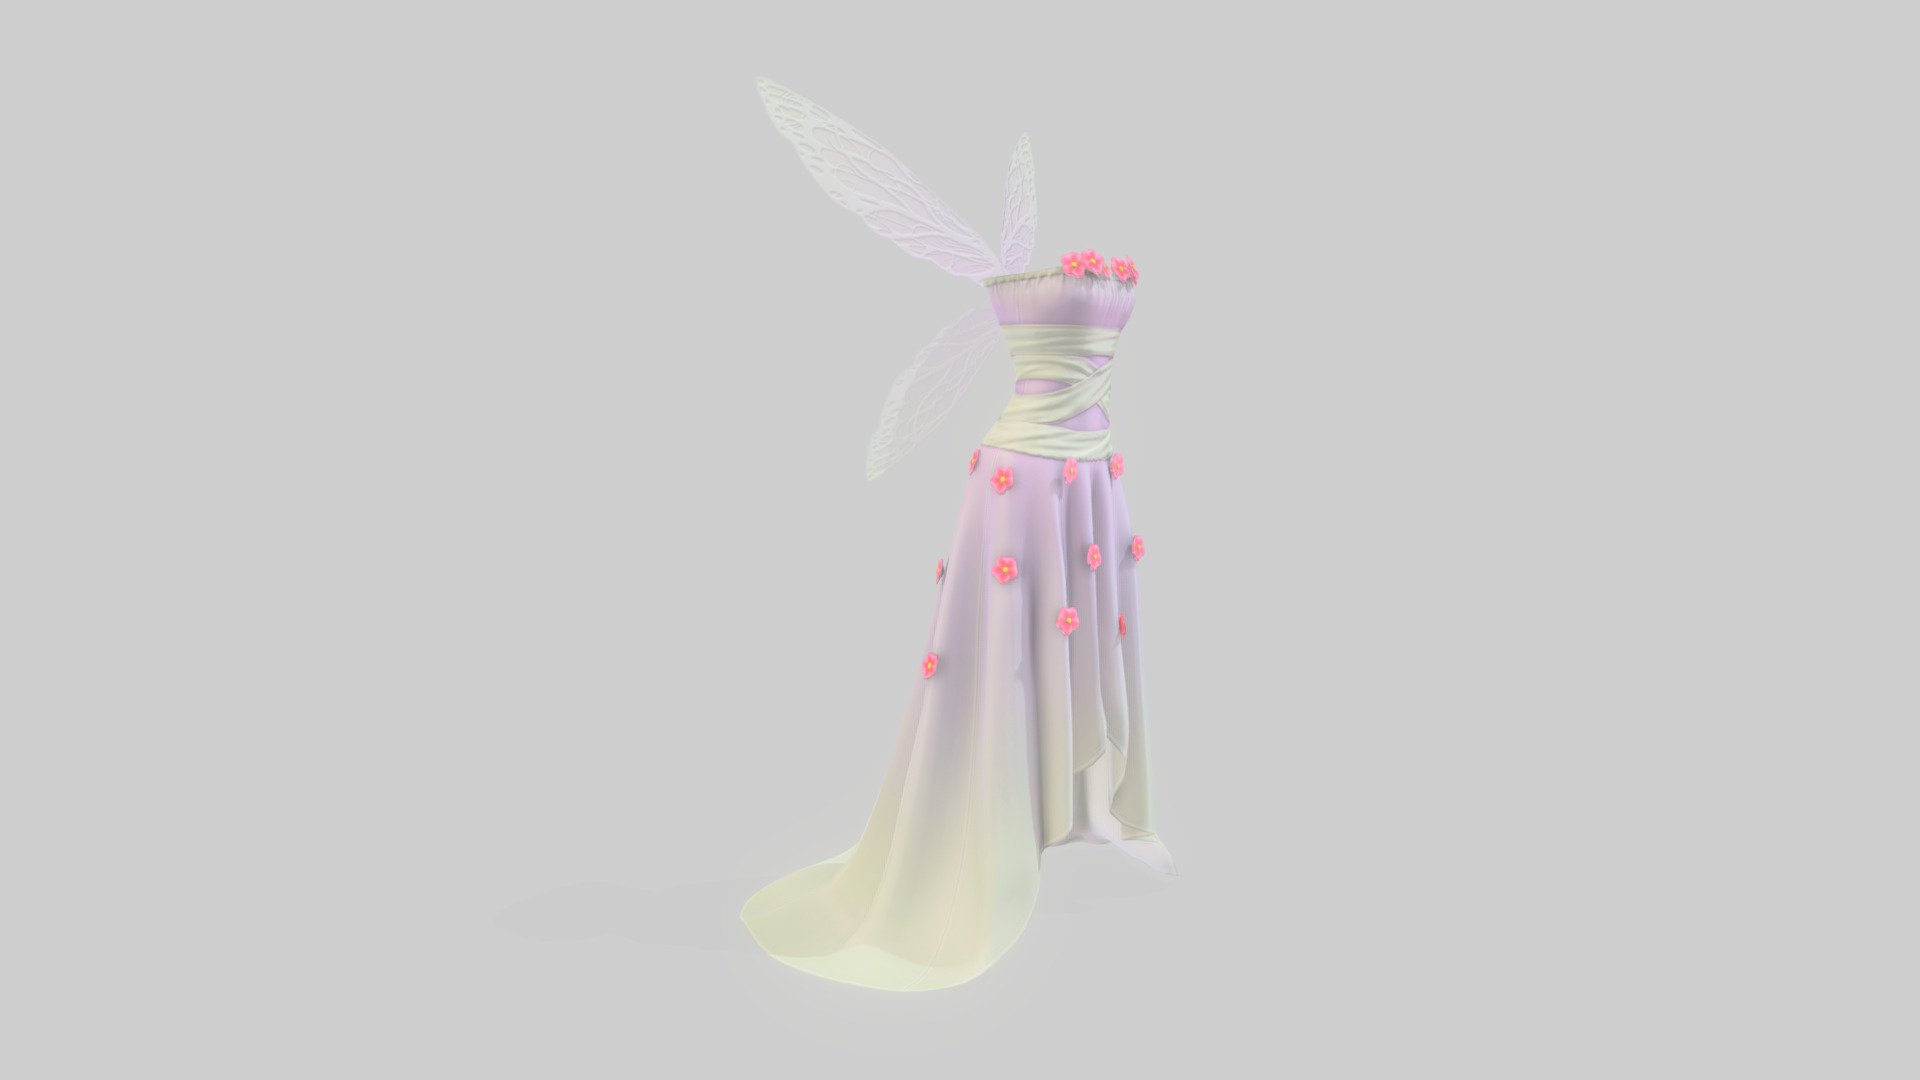 Dress + Wings

Can fit to any character

Ready for games

Clean topology

No overlapping unwrapped UVs

High quality realistic textues

FBX, OBJ, gITF, USDZ (request other formats)

PBR or Classic

Please ask for any other questions

Type     user:3dia &ldquo;search term